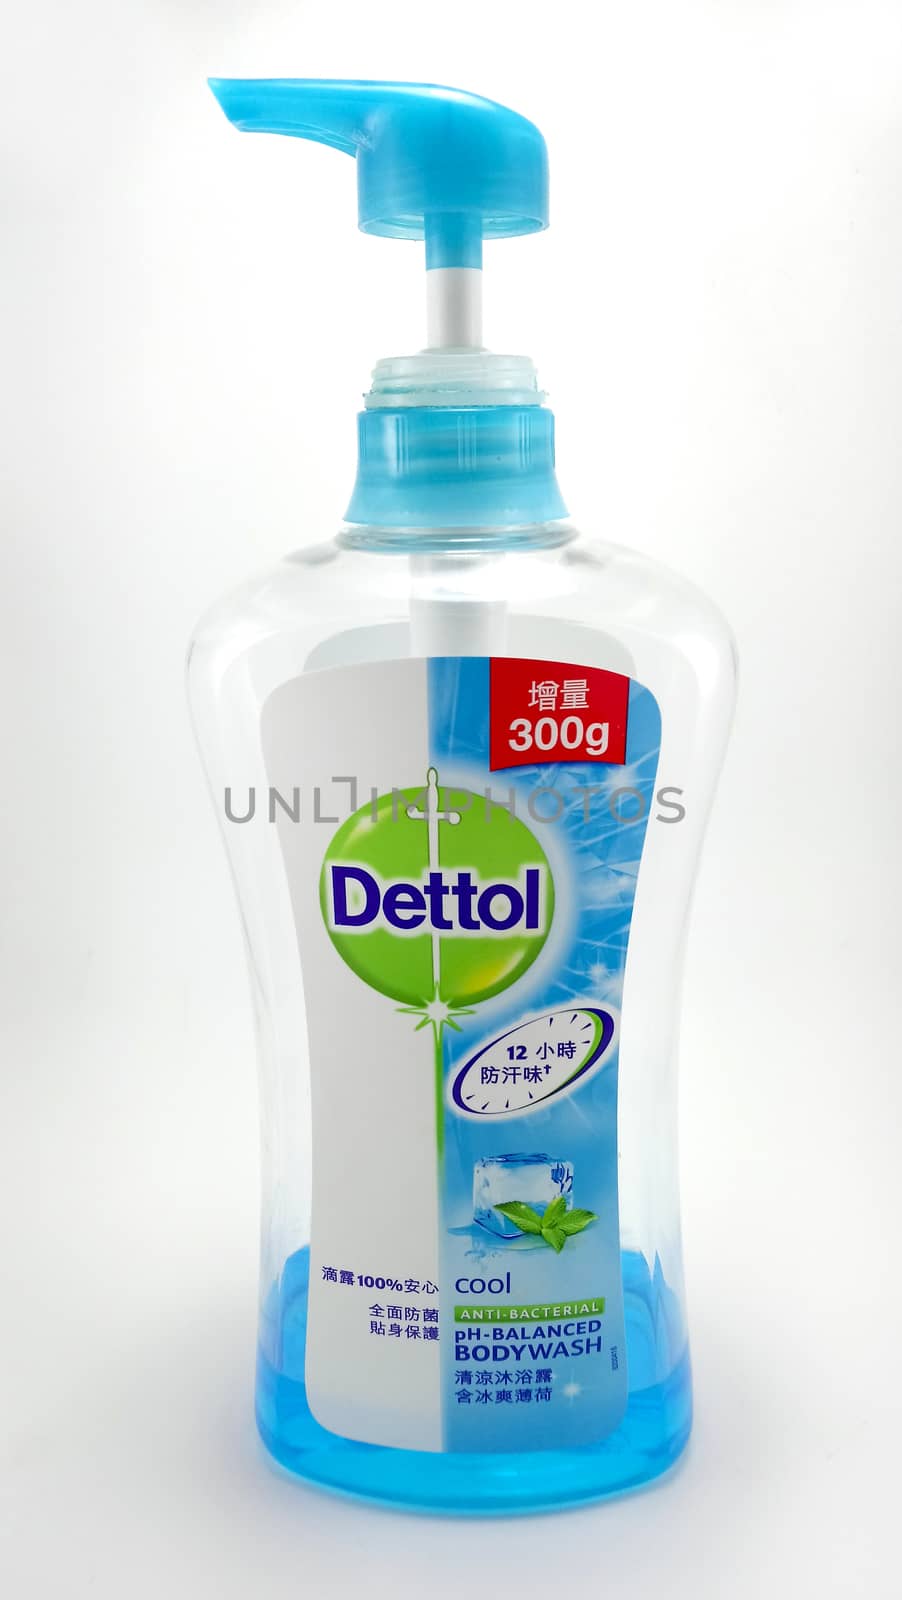 Dettol cool body wash in Manila, Philippines by imwaltersy